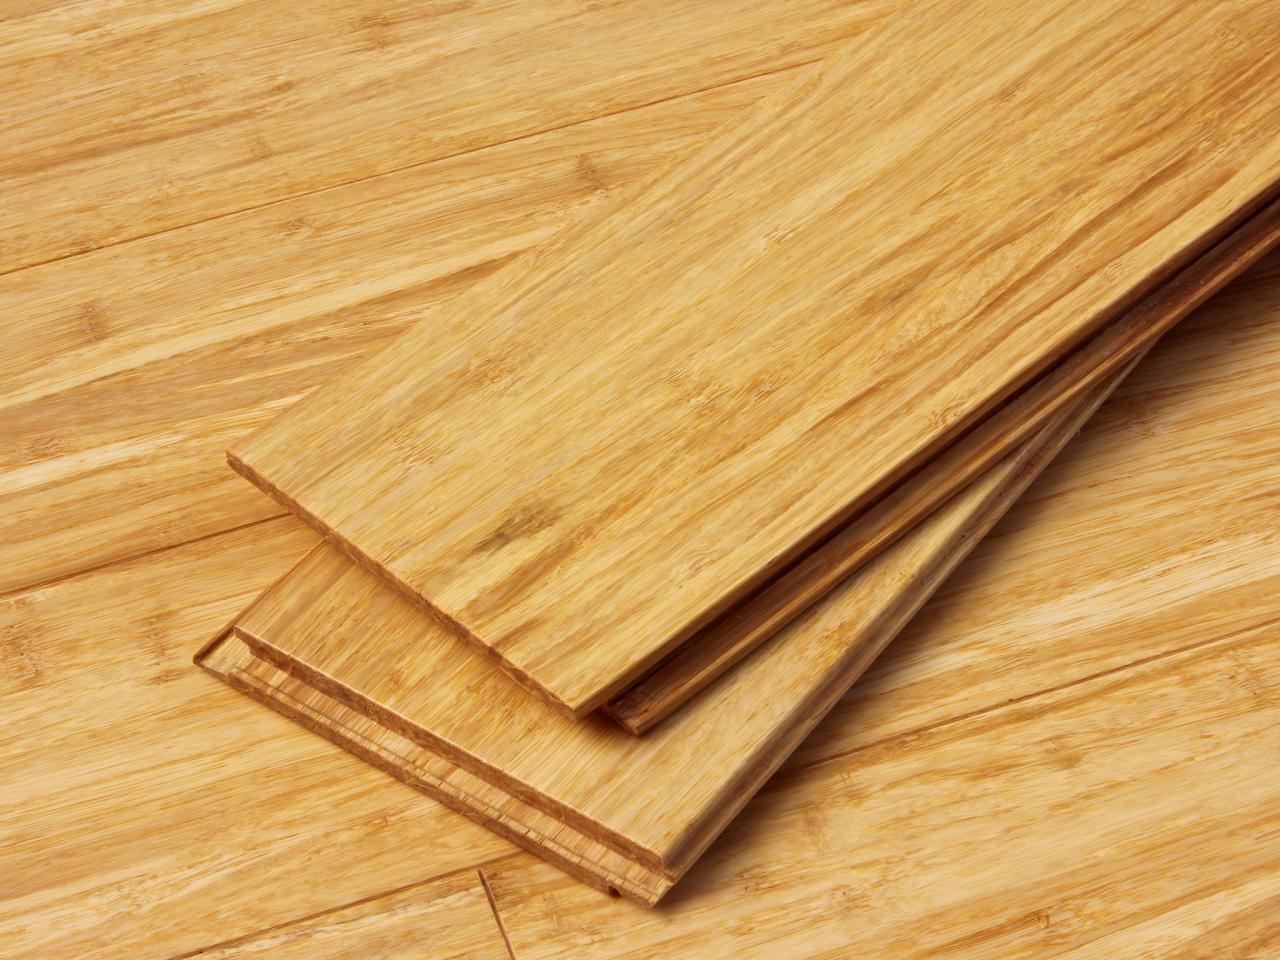 How To Install Two Tone Bamboo Flooring, Installation Of Bamboo Hardwood Flooring